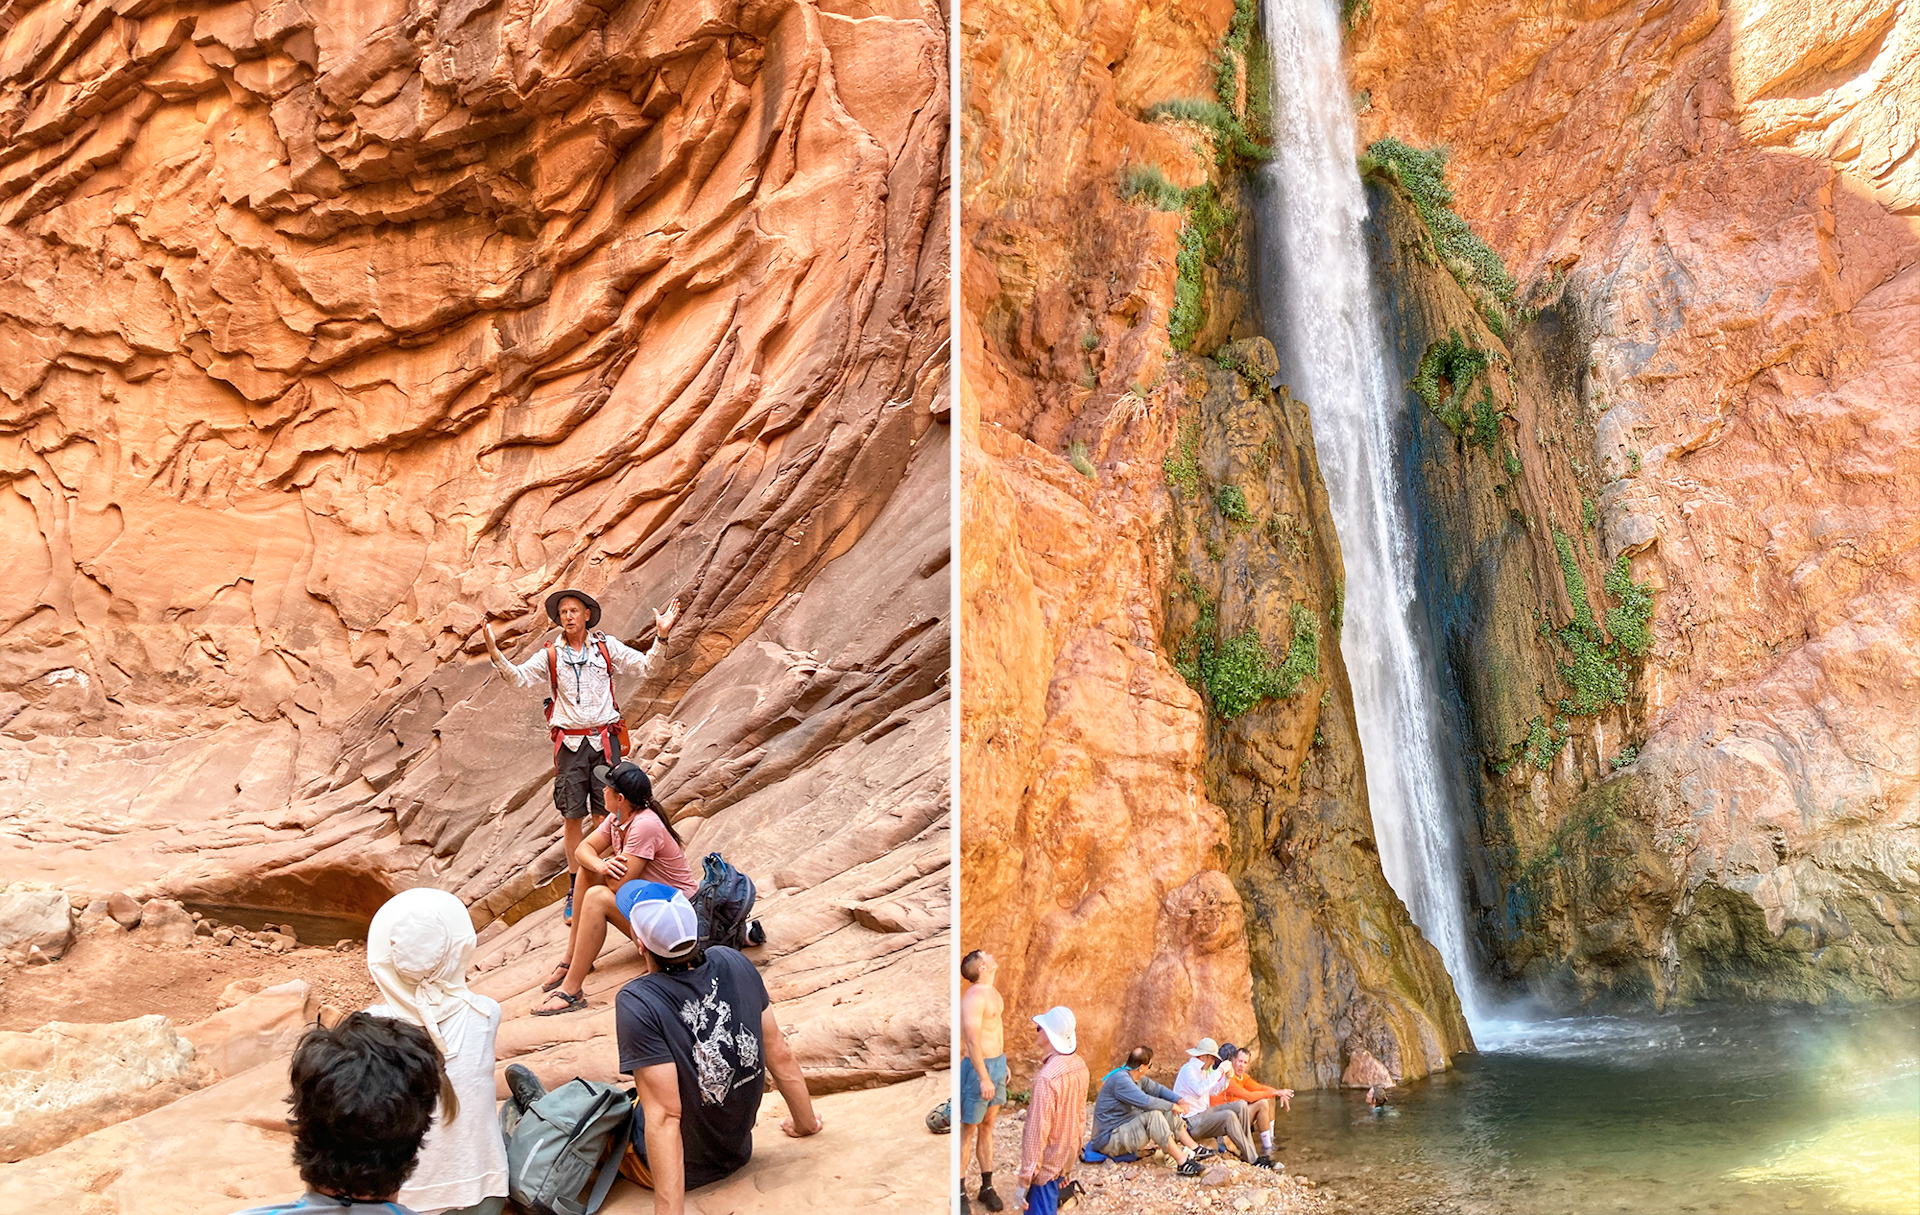 Guides lead hikers to natural features in the Grand Canyon